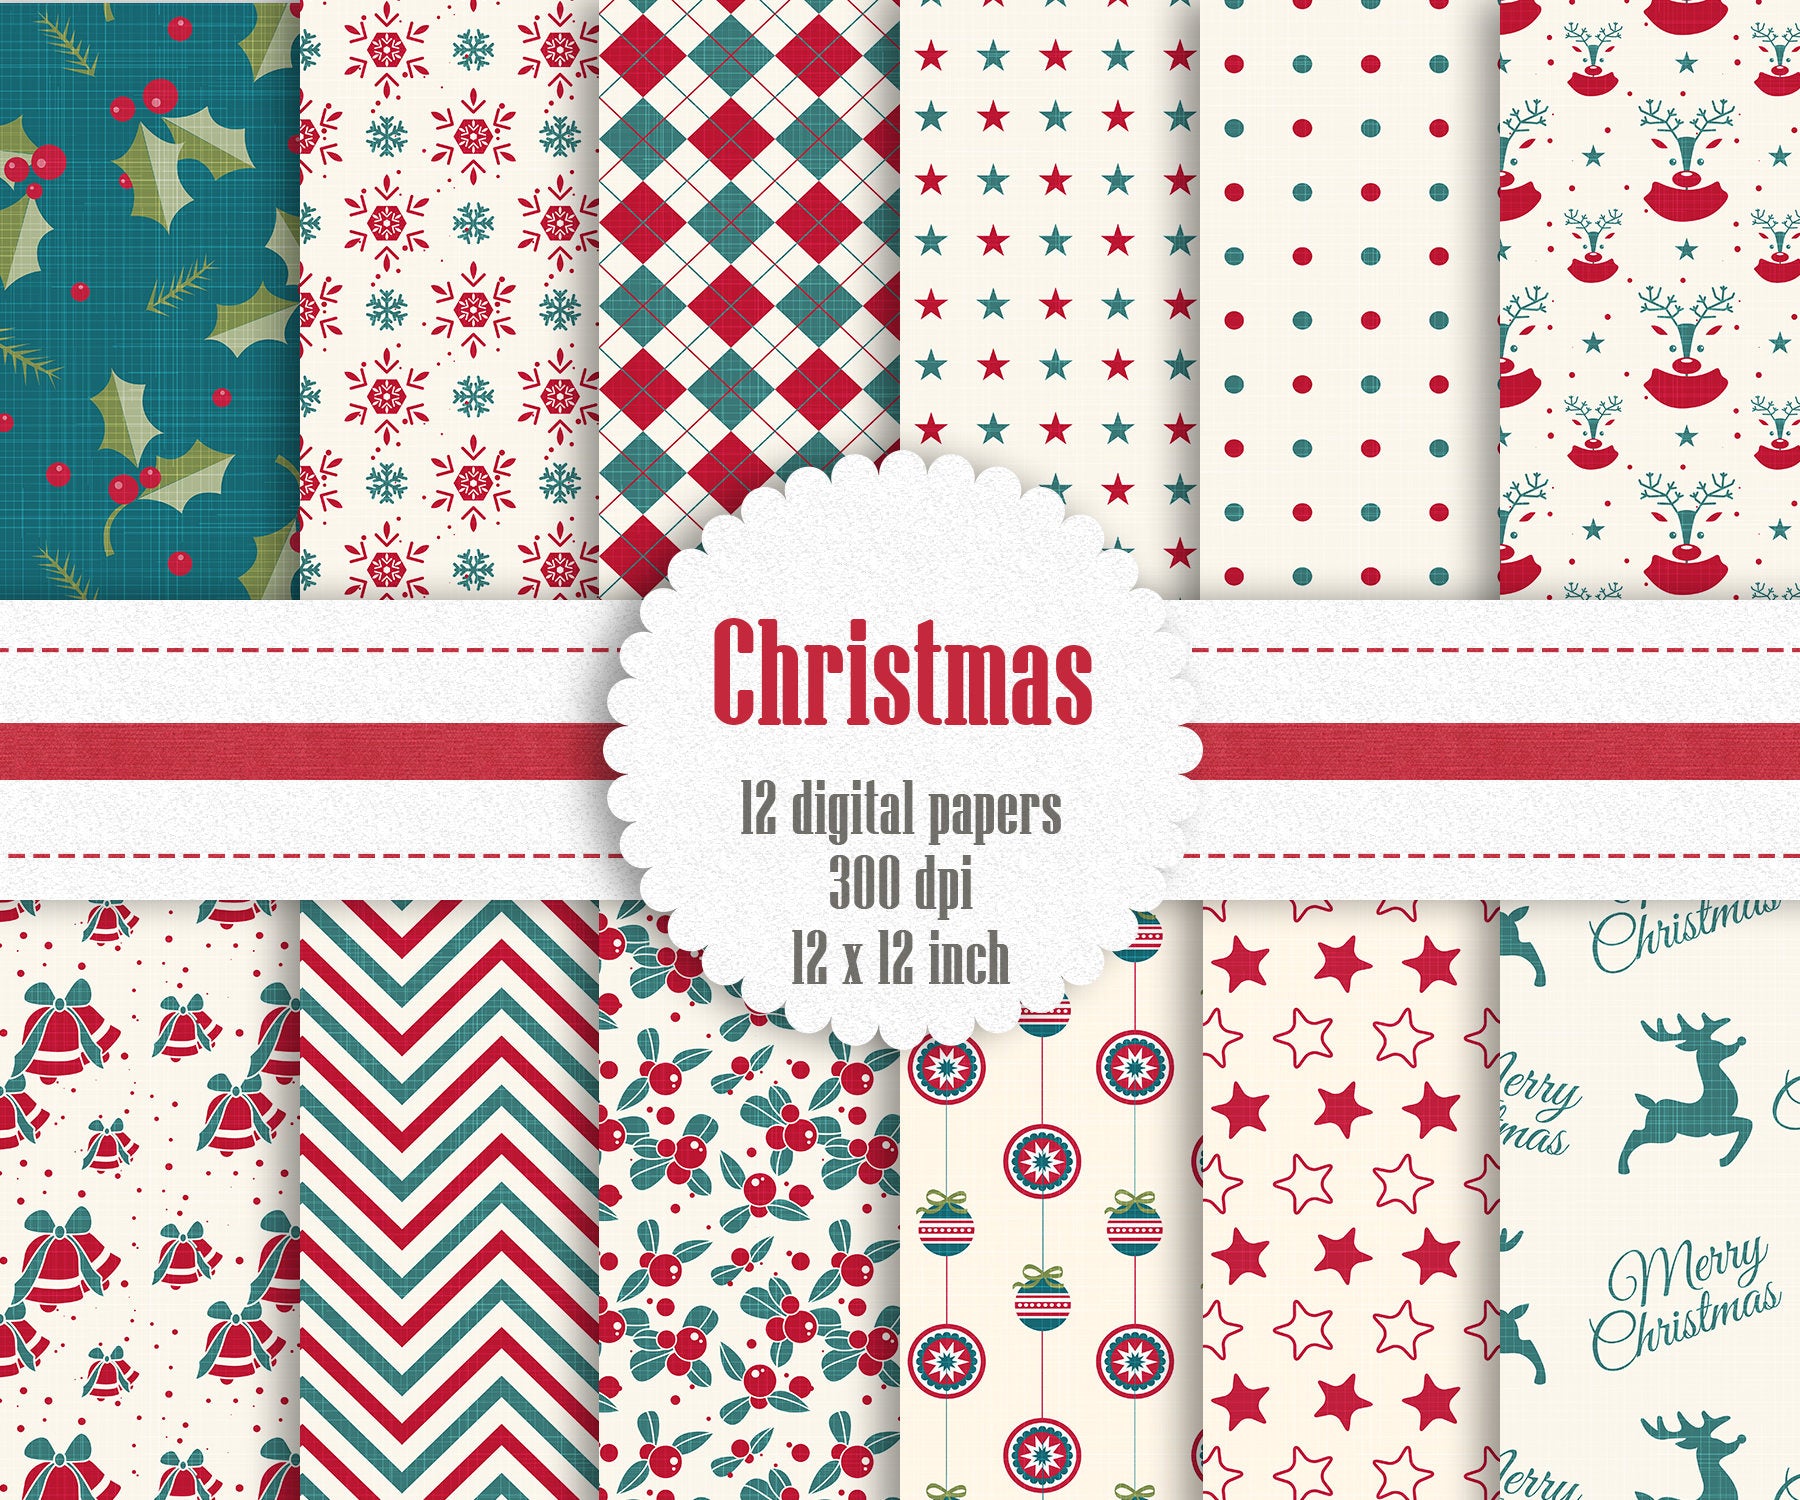 12 Christmas Digital Papers in 12 inch, Instant Download, High Resolution 300 Dpi, Commercial Use